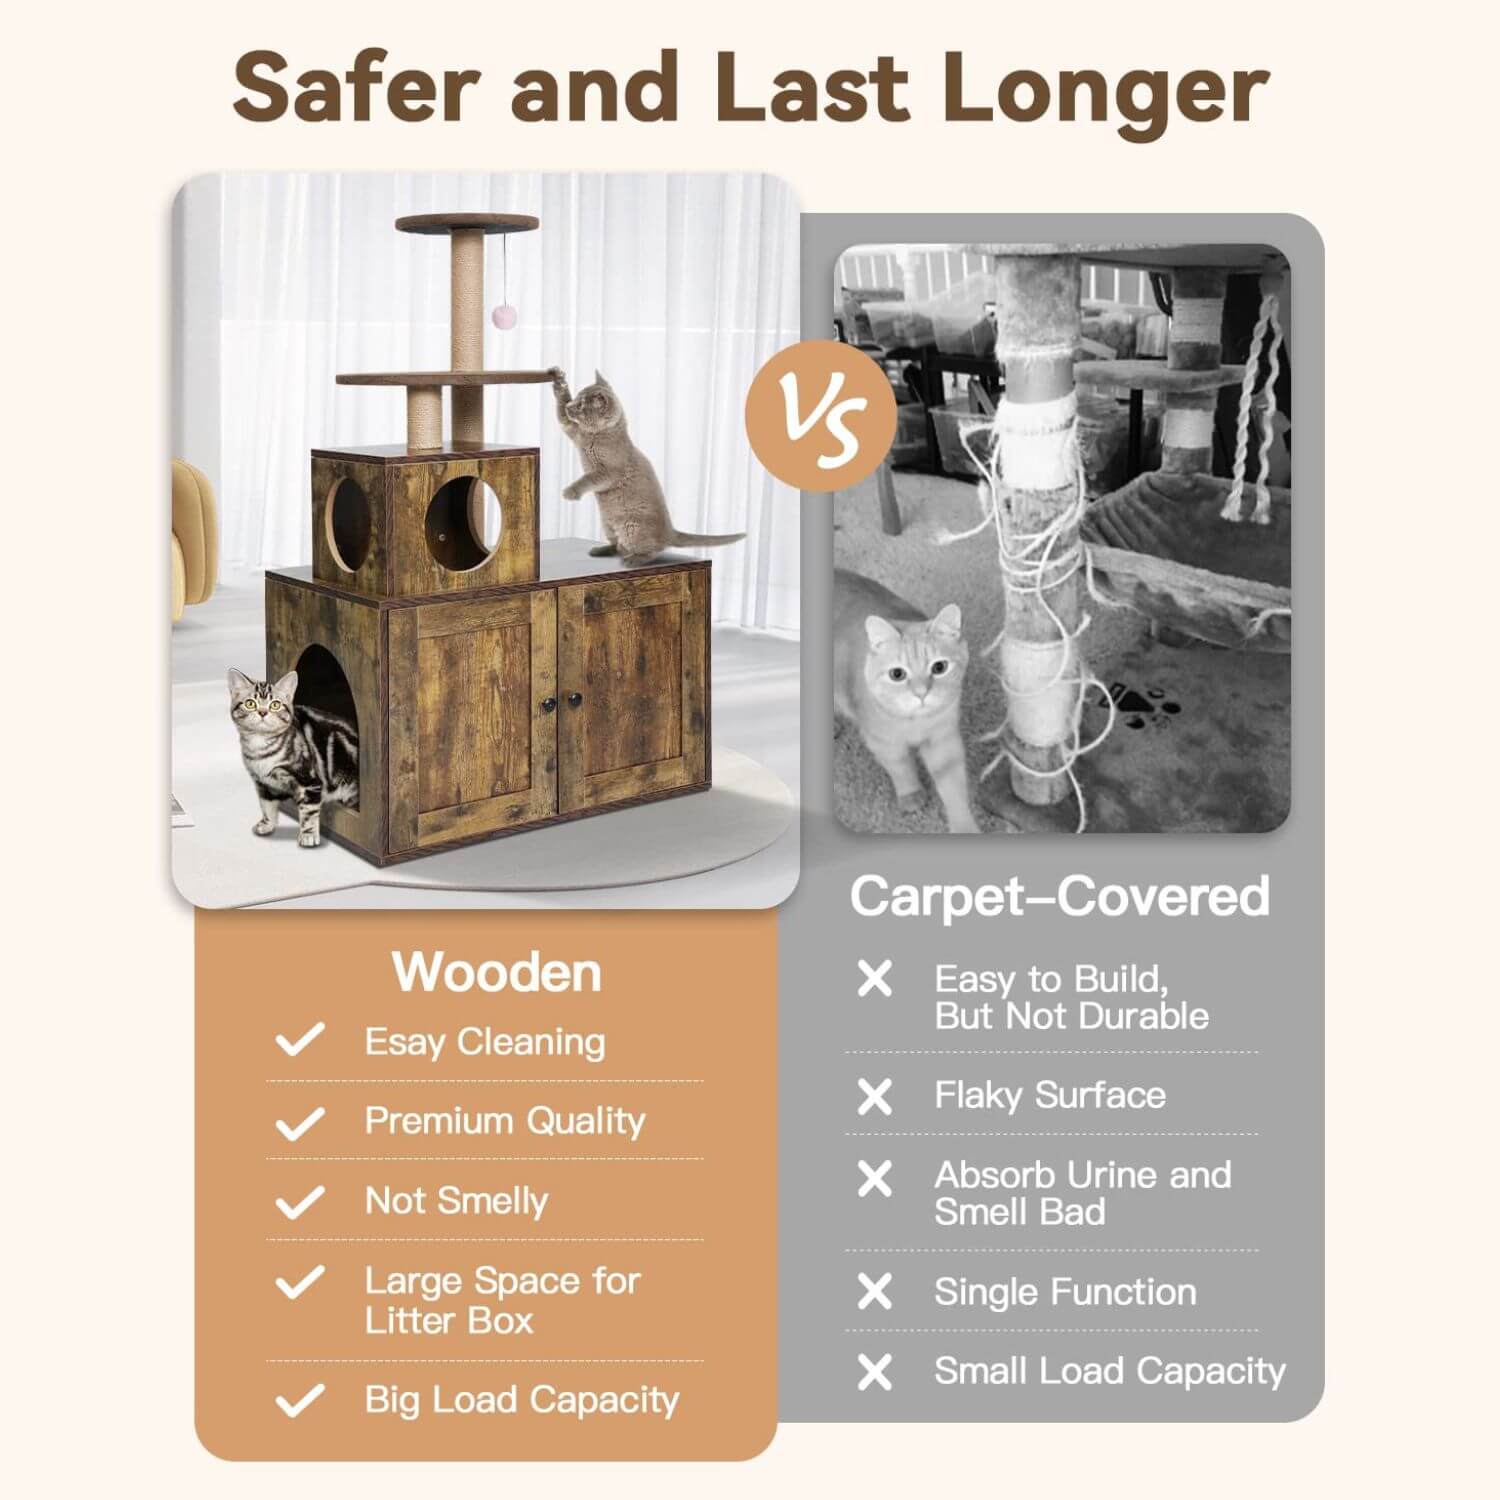 Cat Tree Cat Tower for Indoor Cats compares with others is safer and last longer